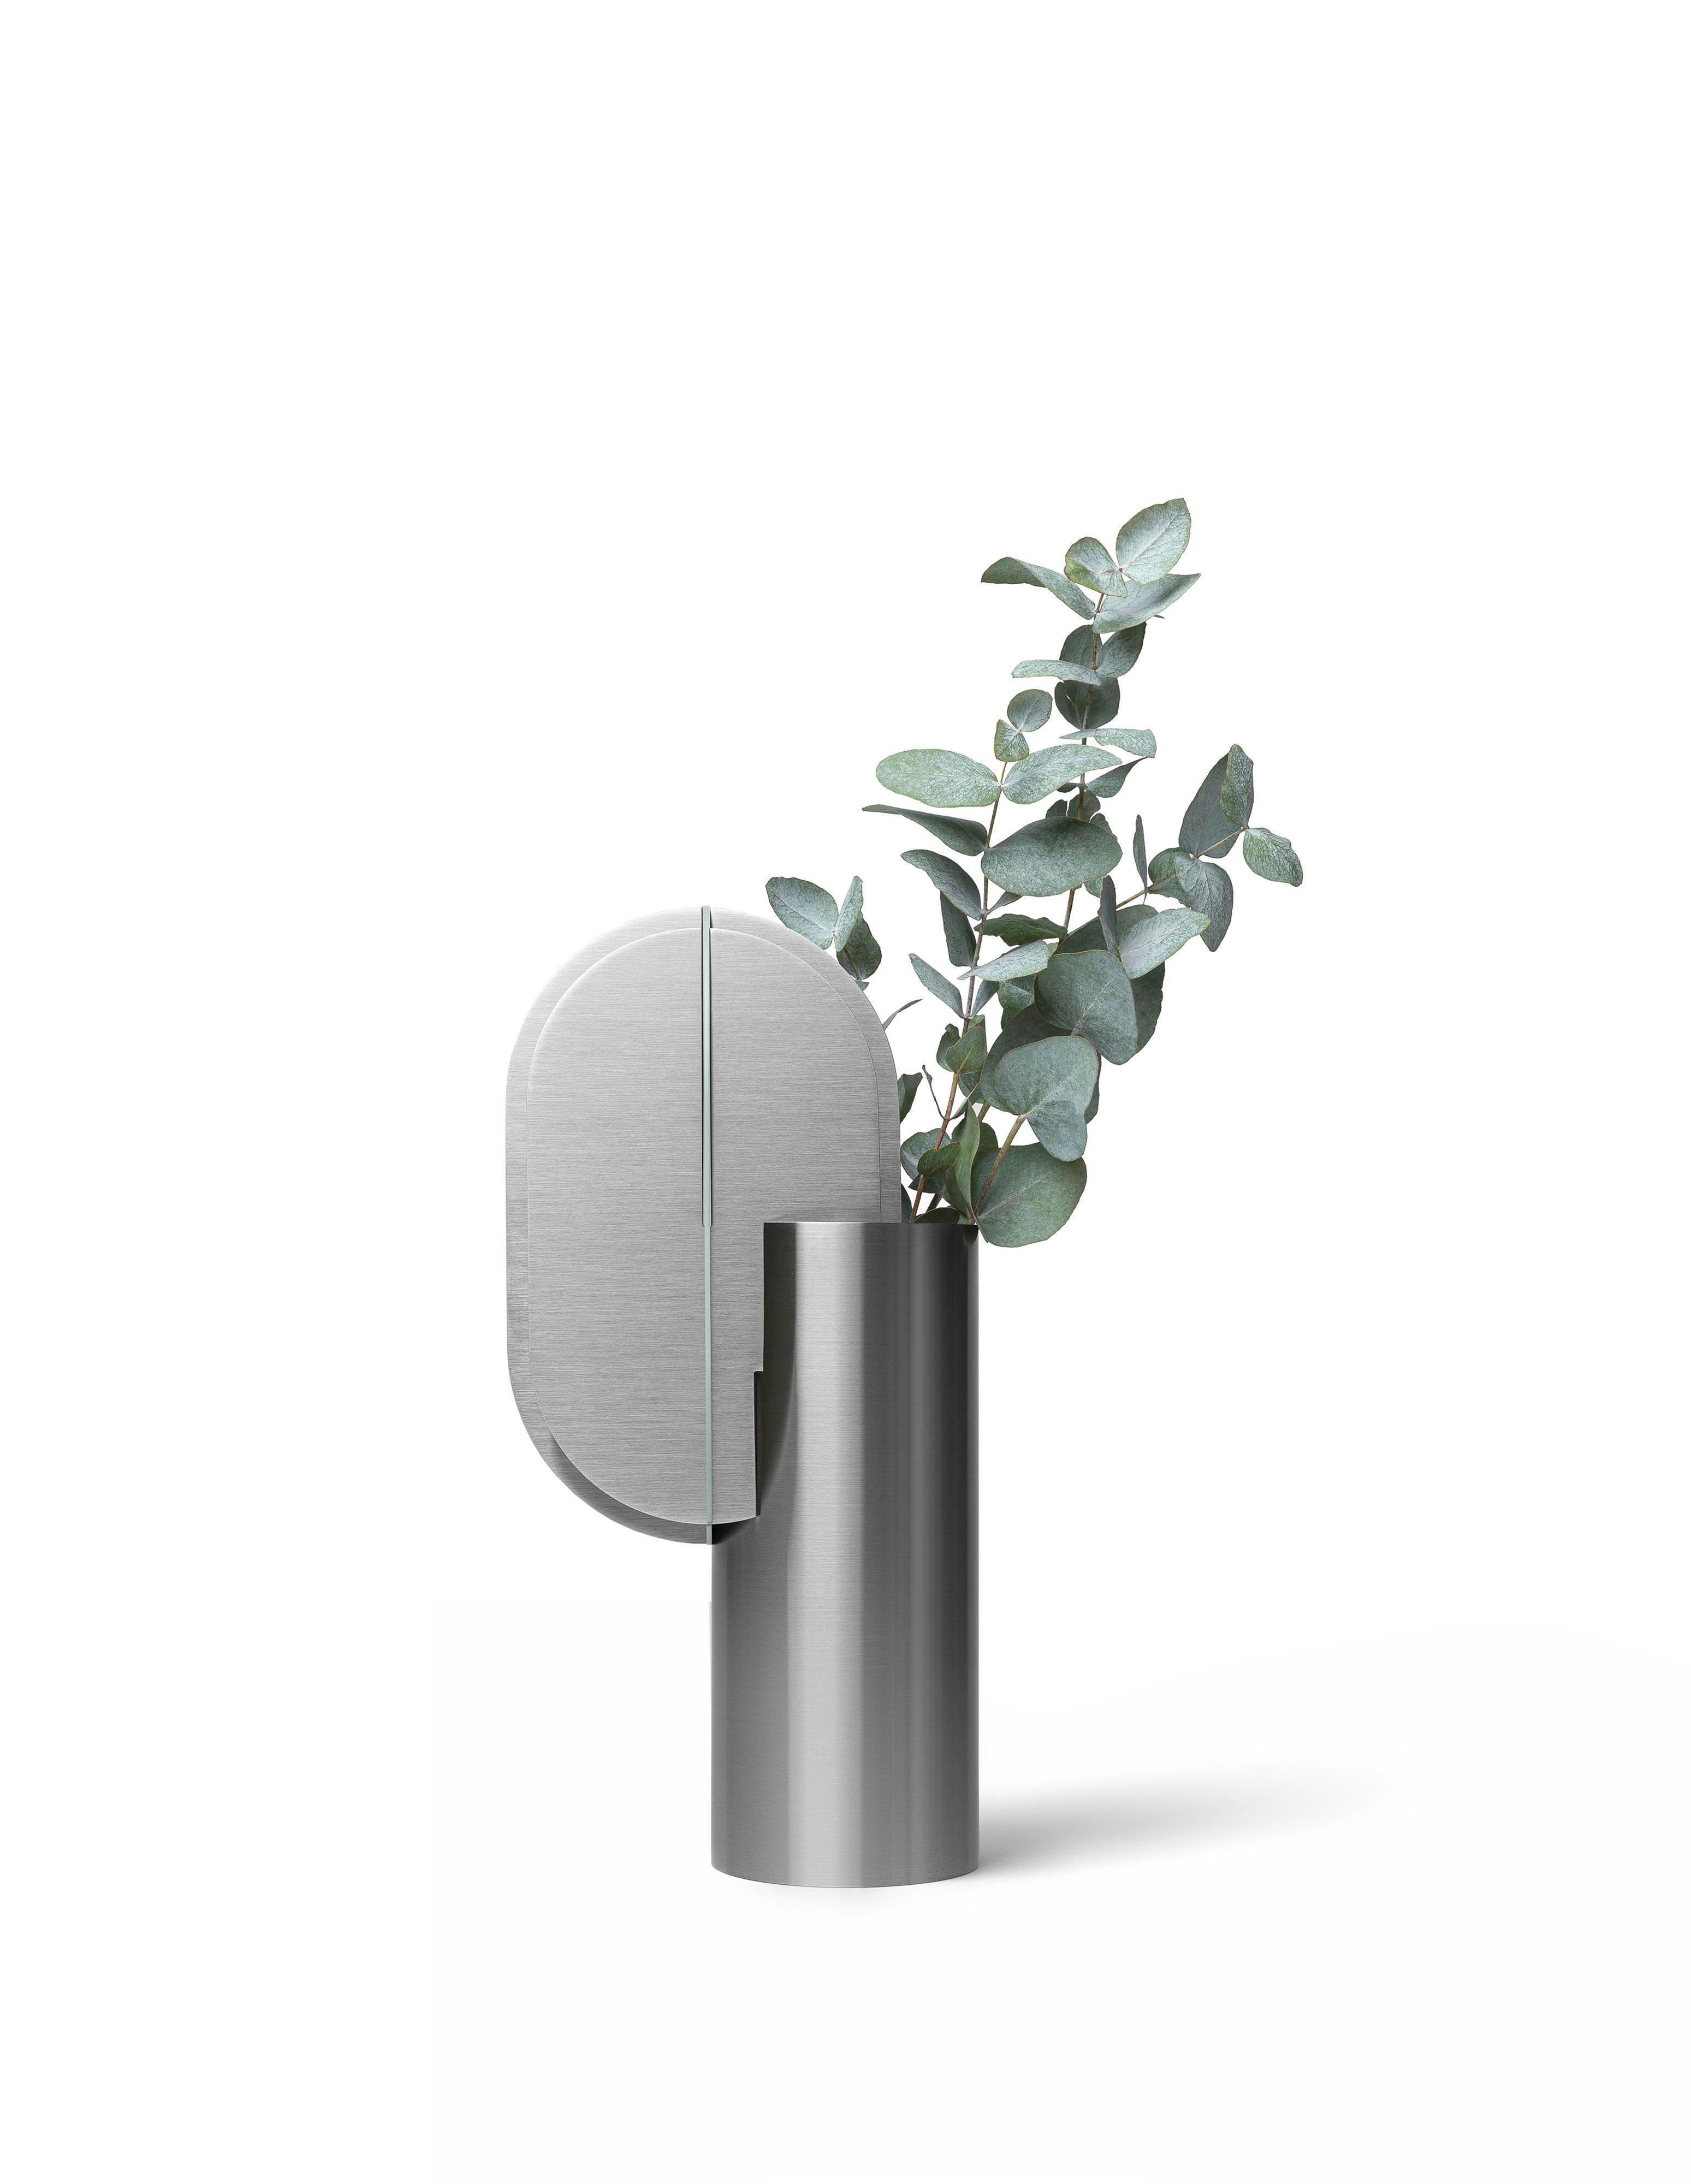 Organic Modern Contemporary Vase 'Gabo CS11' by Noom, Brushed Stainless Steel For Sale